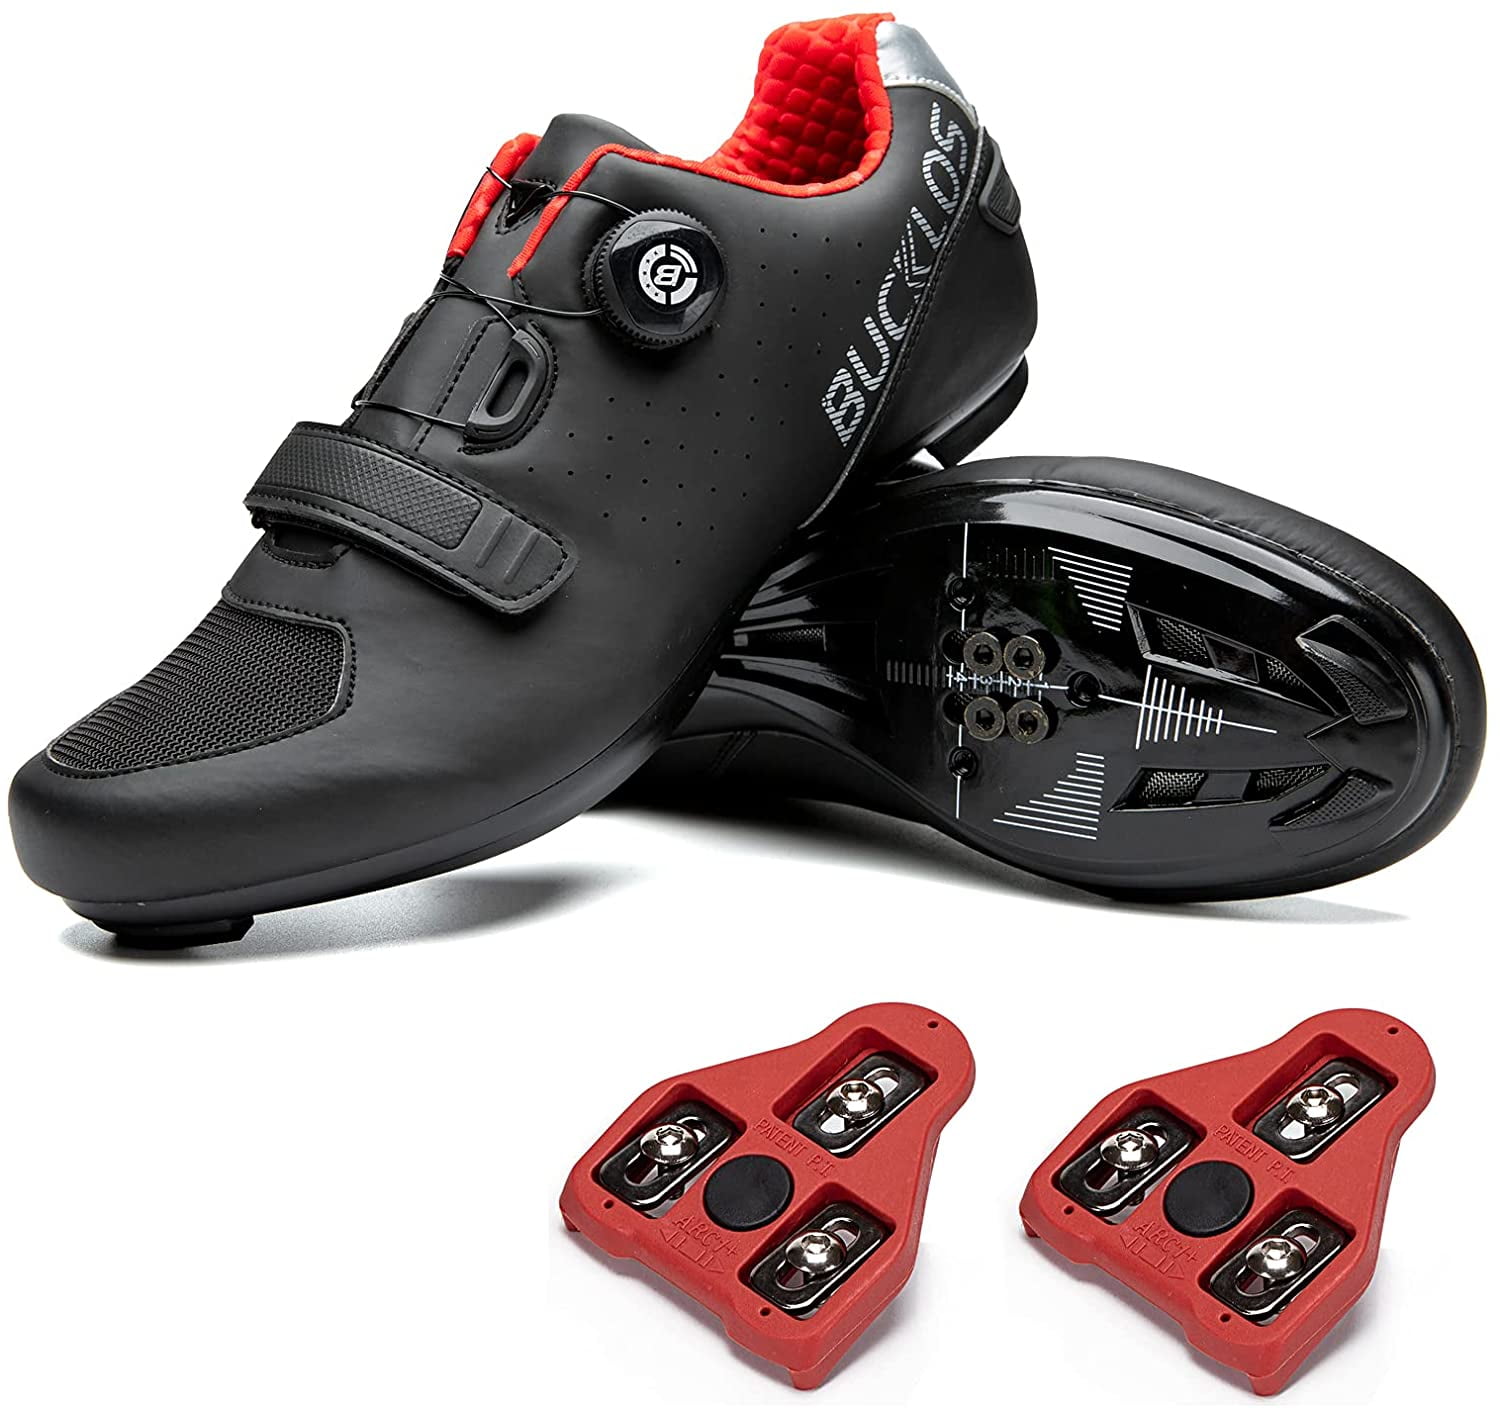 Womens 2021 Hot Road Bike Cycling Shoes Spin Shoes with Compatible Cleat Peloton Shoes with SPD and Delta for Men Lock Pedal Bike Shoes